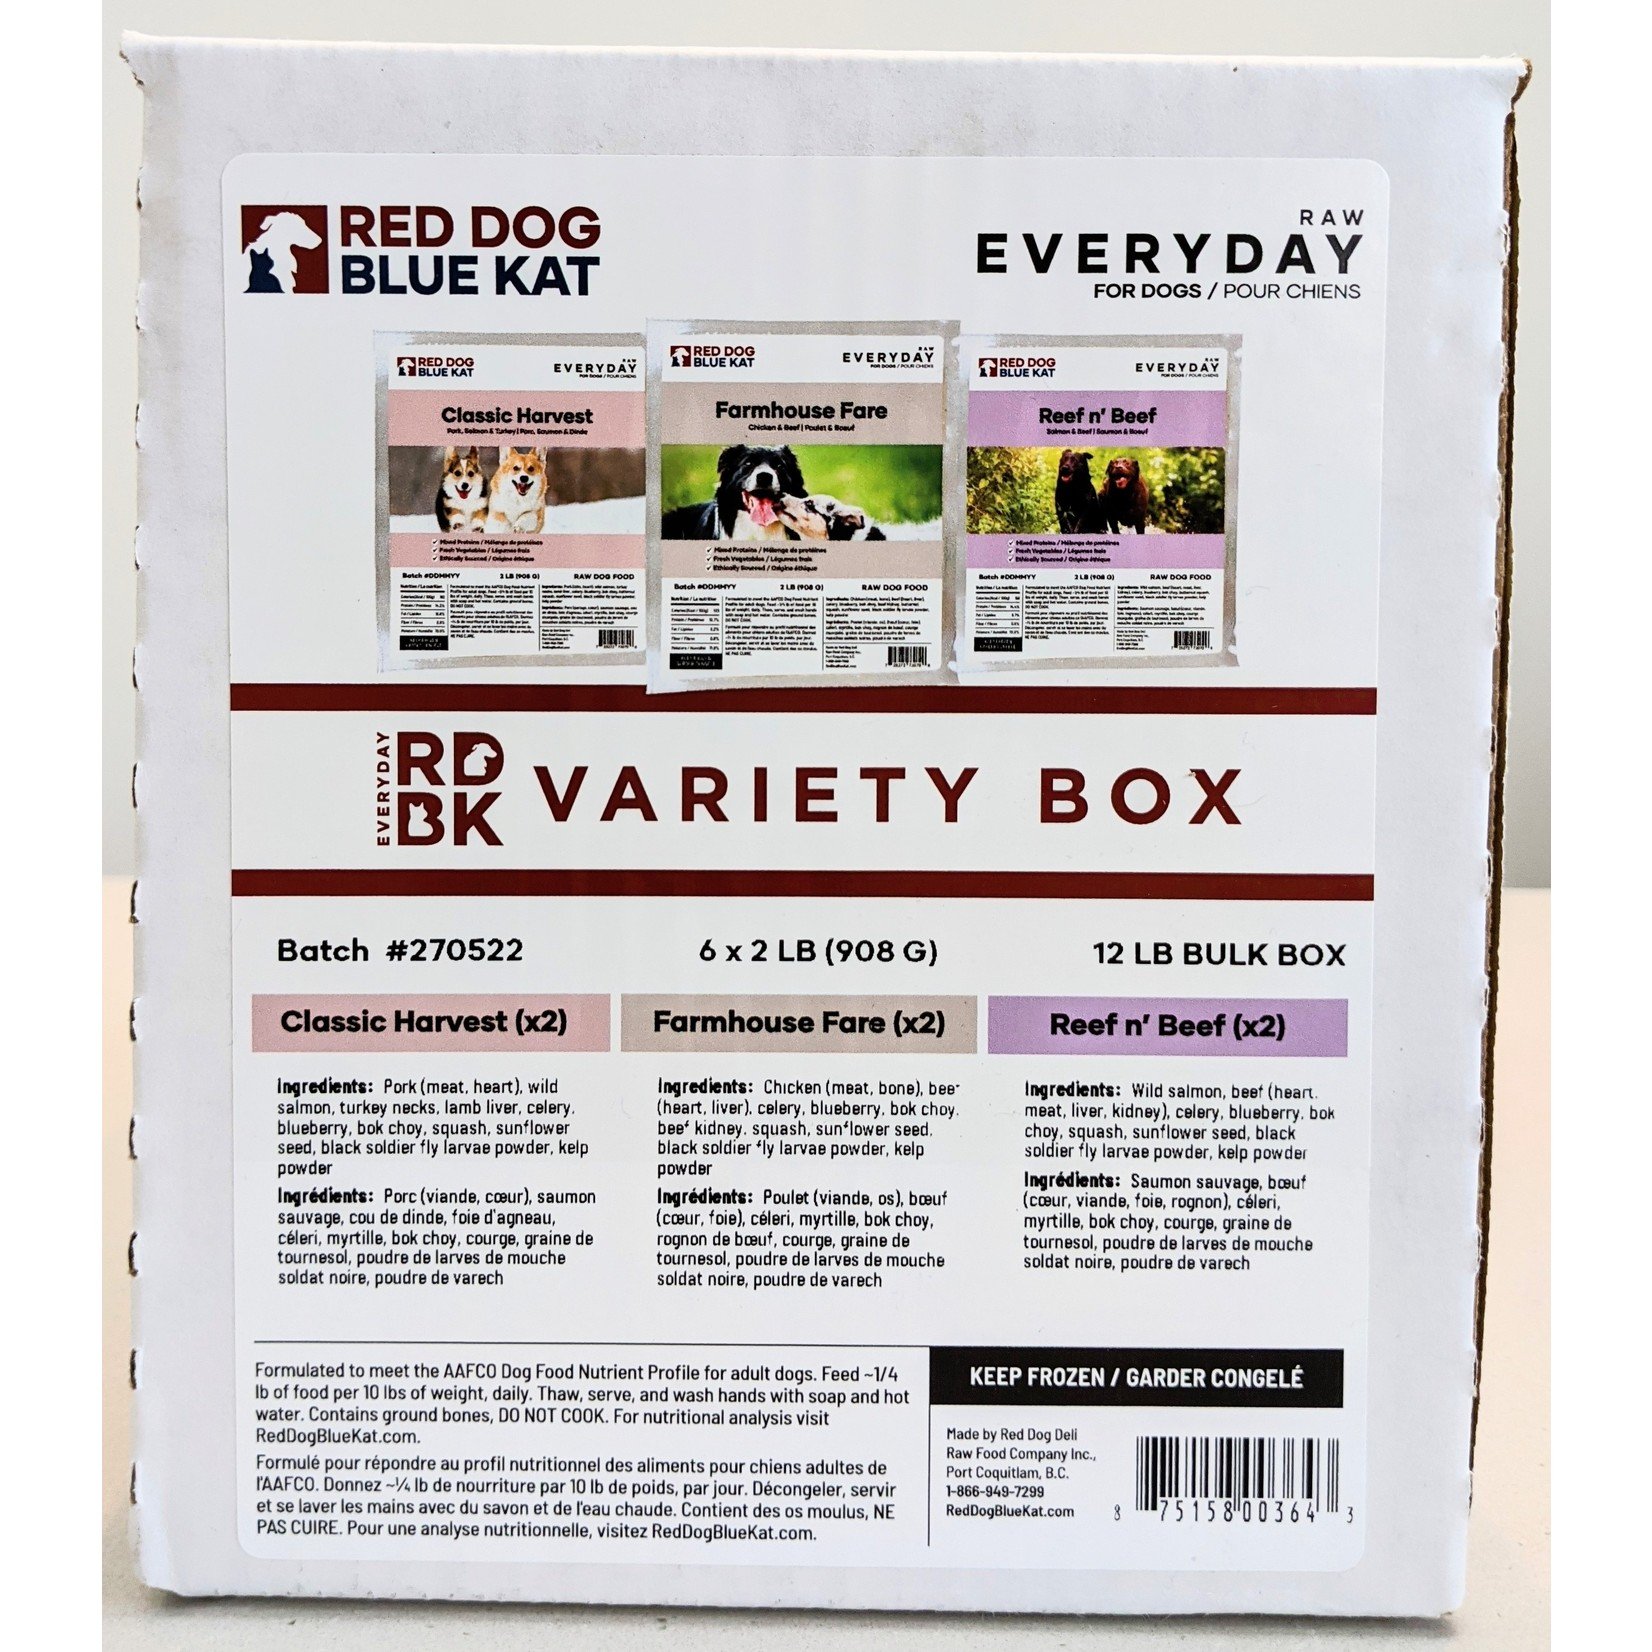 Red Dog Blue Kat RDBK EVERYDAY RAW for Dogs Variety Pack 12lb